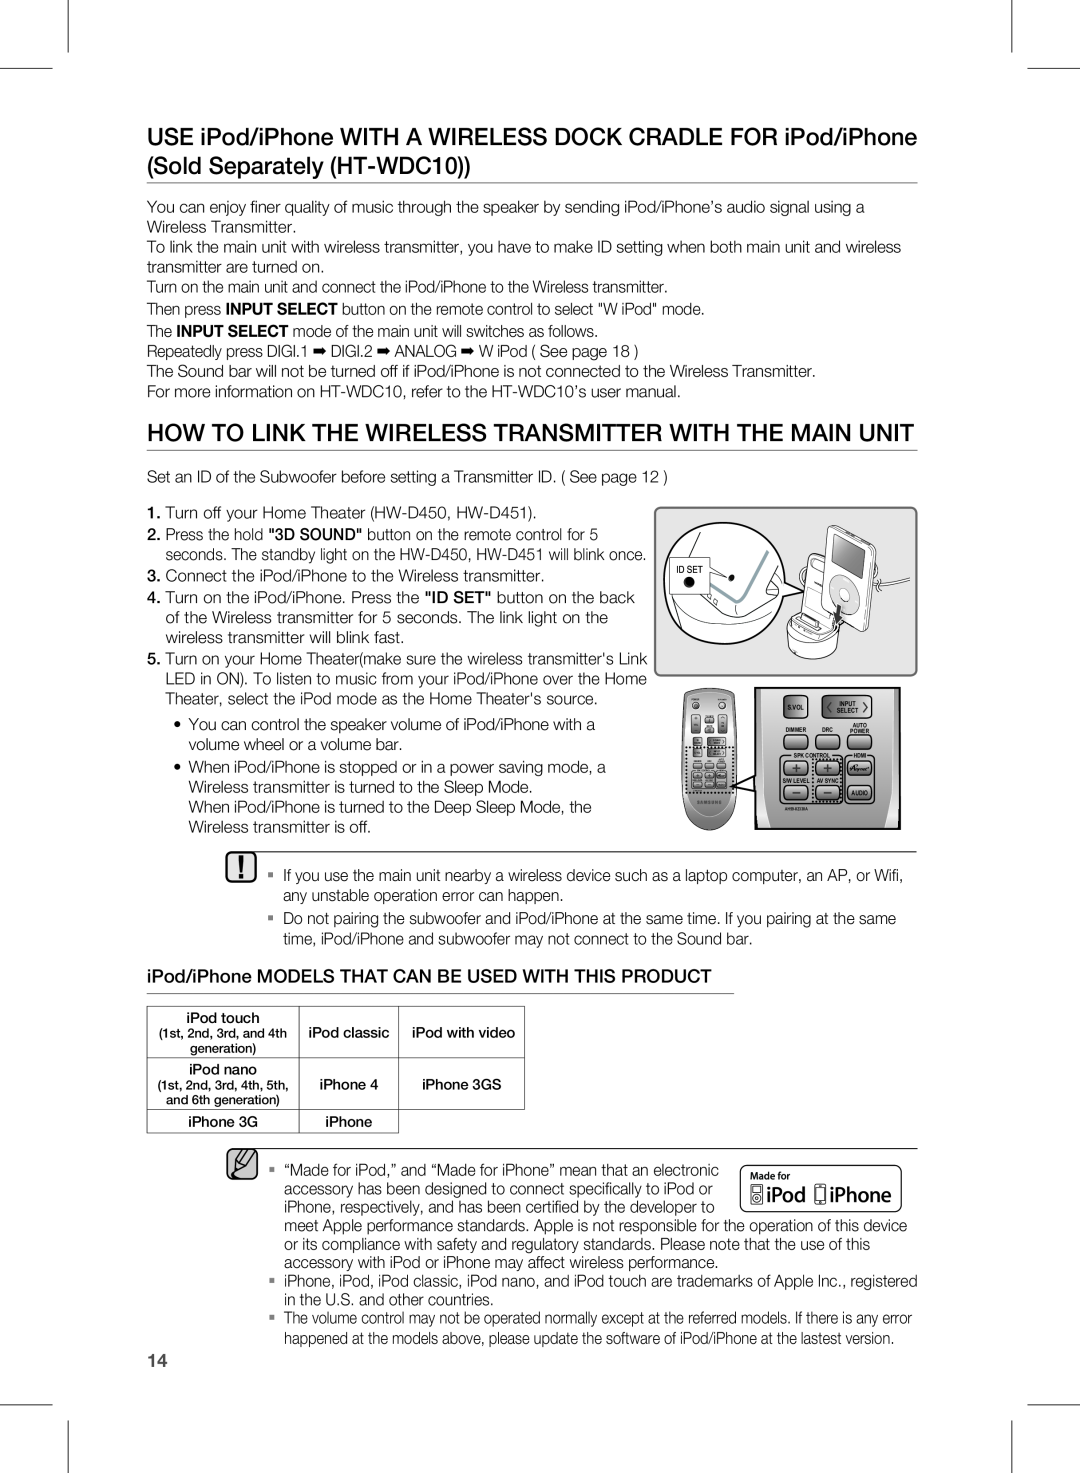 Siemens user manual Turn off your Home Theater HW-D450, HW-D451 